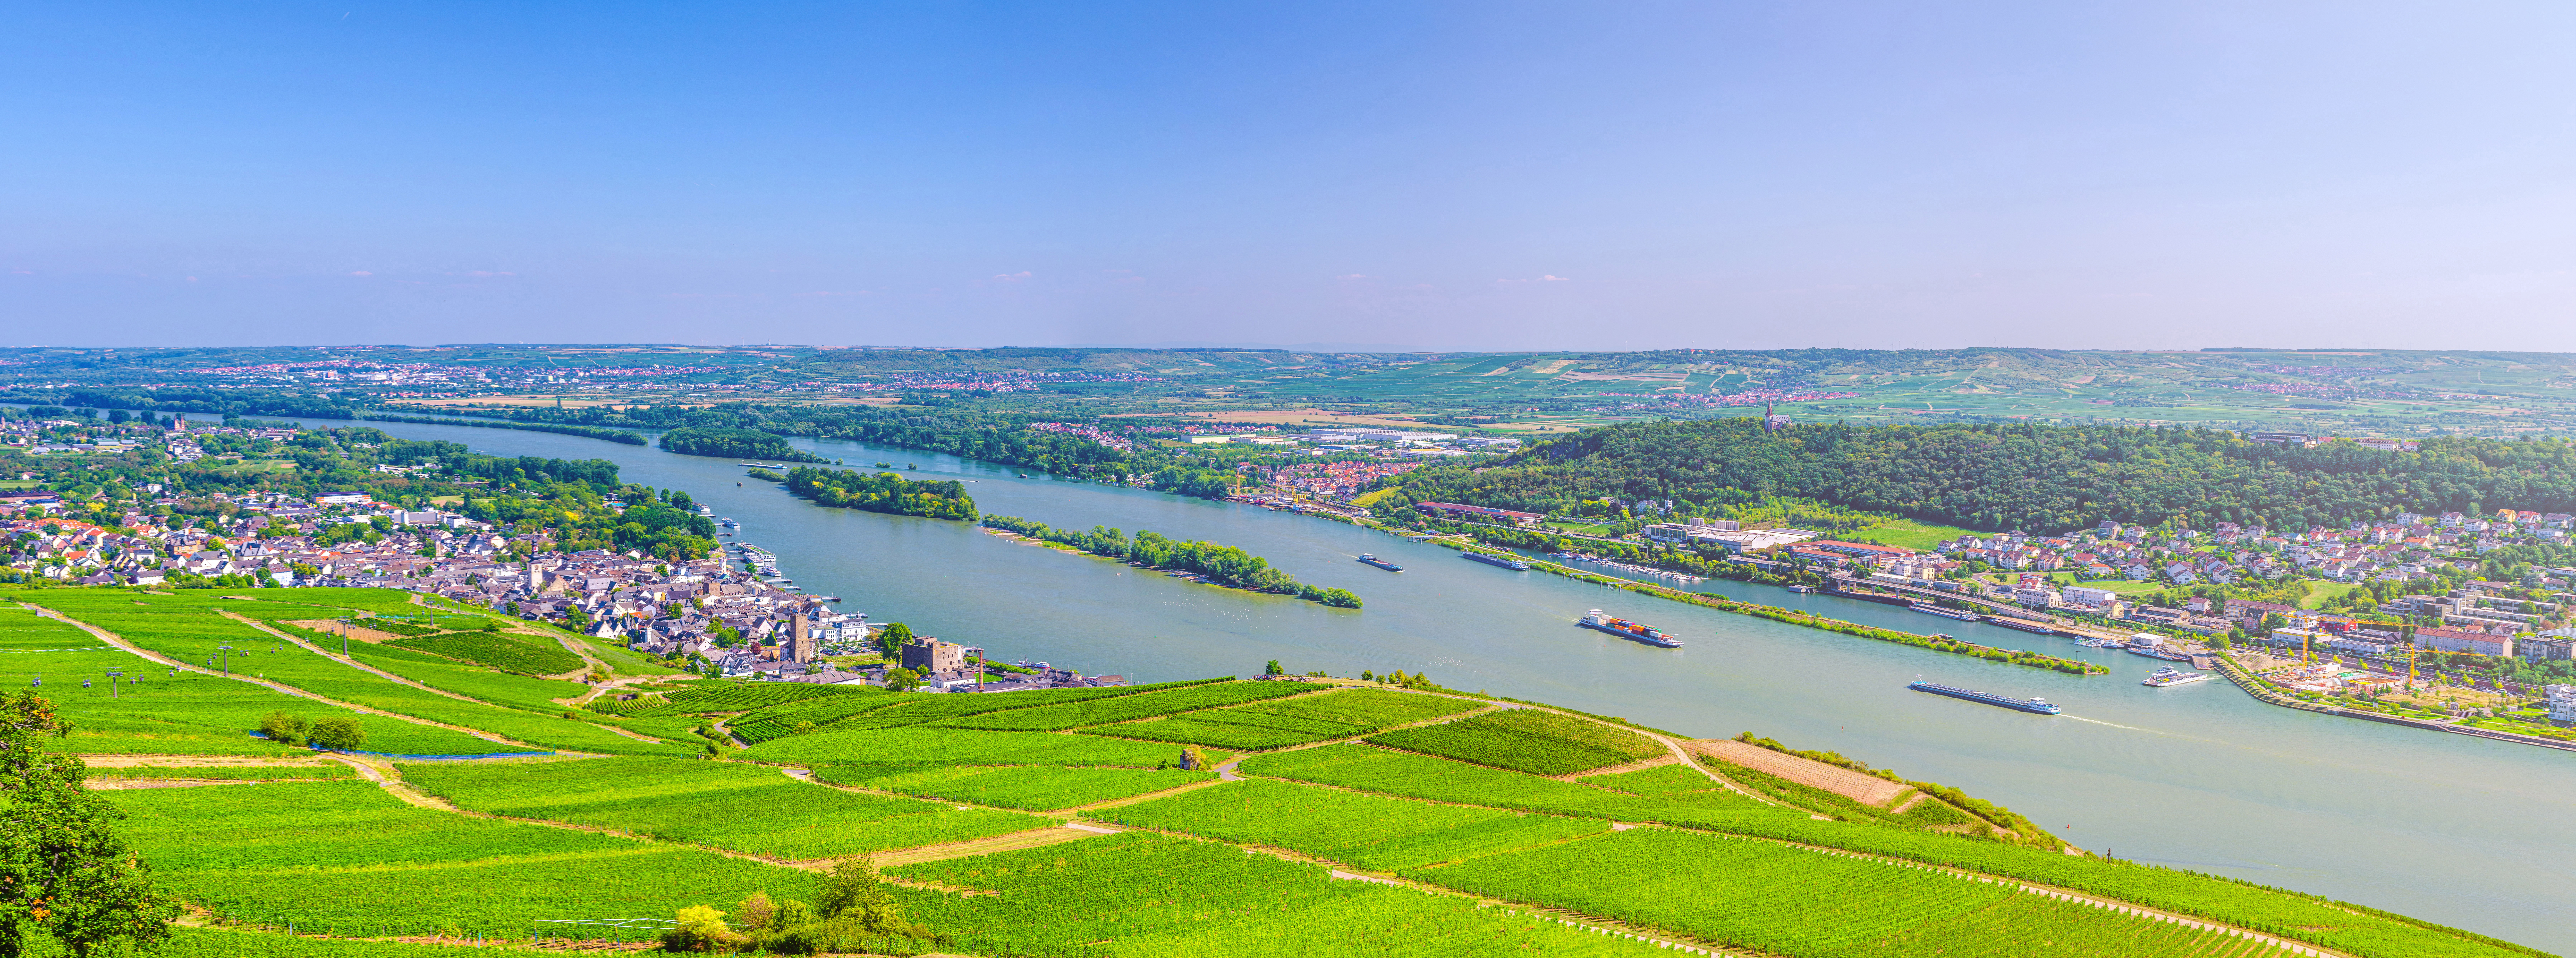 Once in a Lifetime Experiences on a River Cruise - Rhine Gorge on the Rhine River in Germany